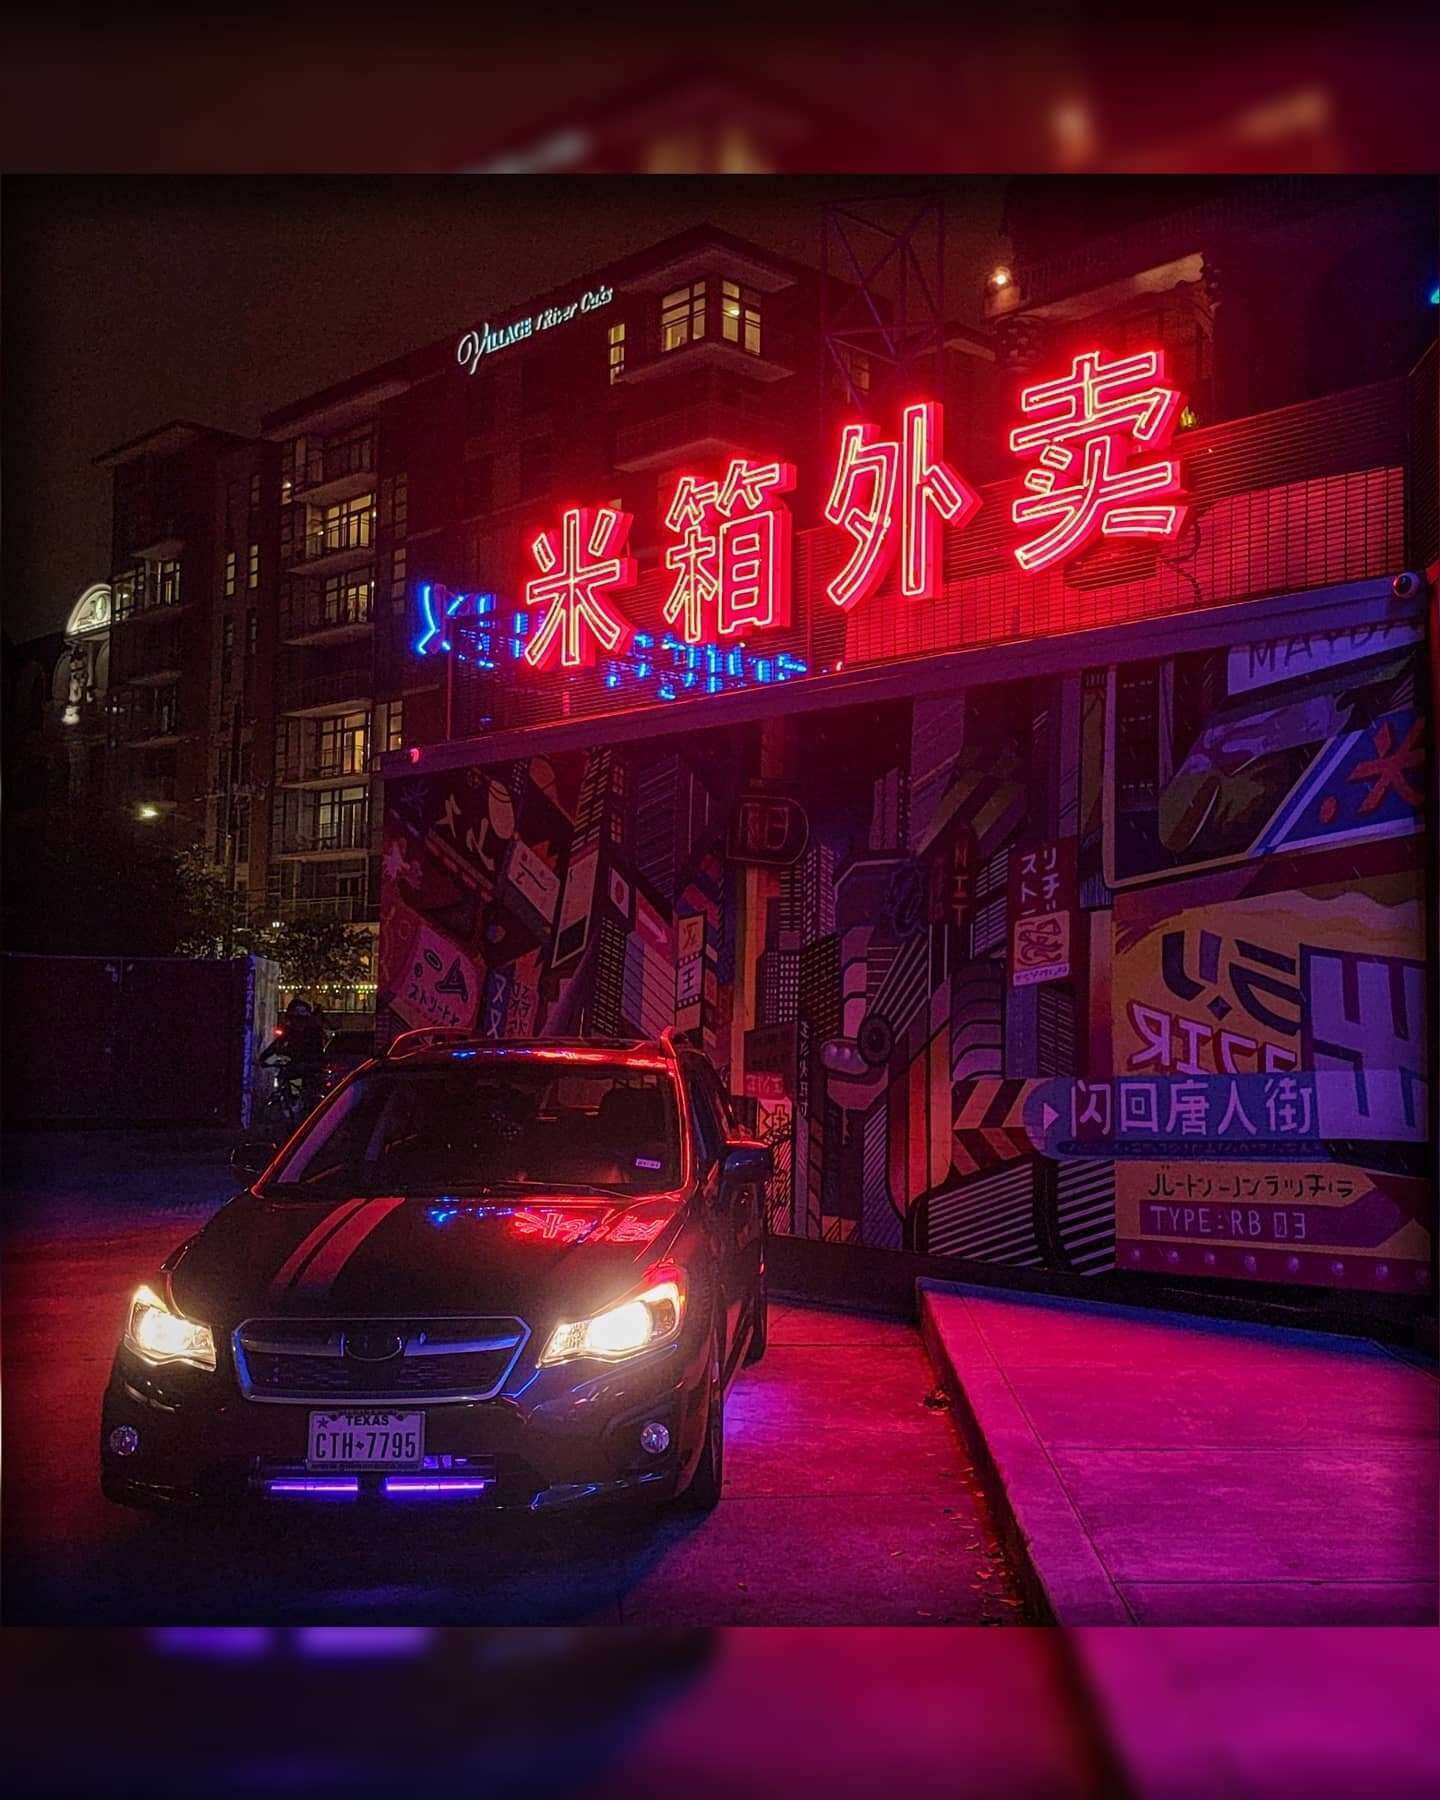 Happy Lunar New Year from Space City!!
@riceboxed
@grace_jiayicheng
#cyberpunk #outrun #neon #night #retrowave #subaru #lunarnewyear #qipao #chinesefood #80saesthetic #retroaesthetic #retrofuture #synthwave